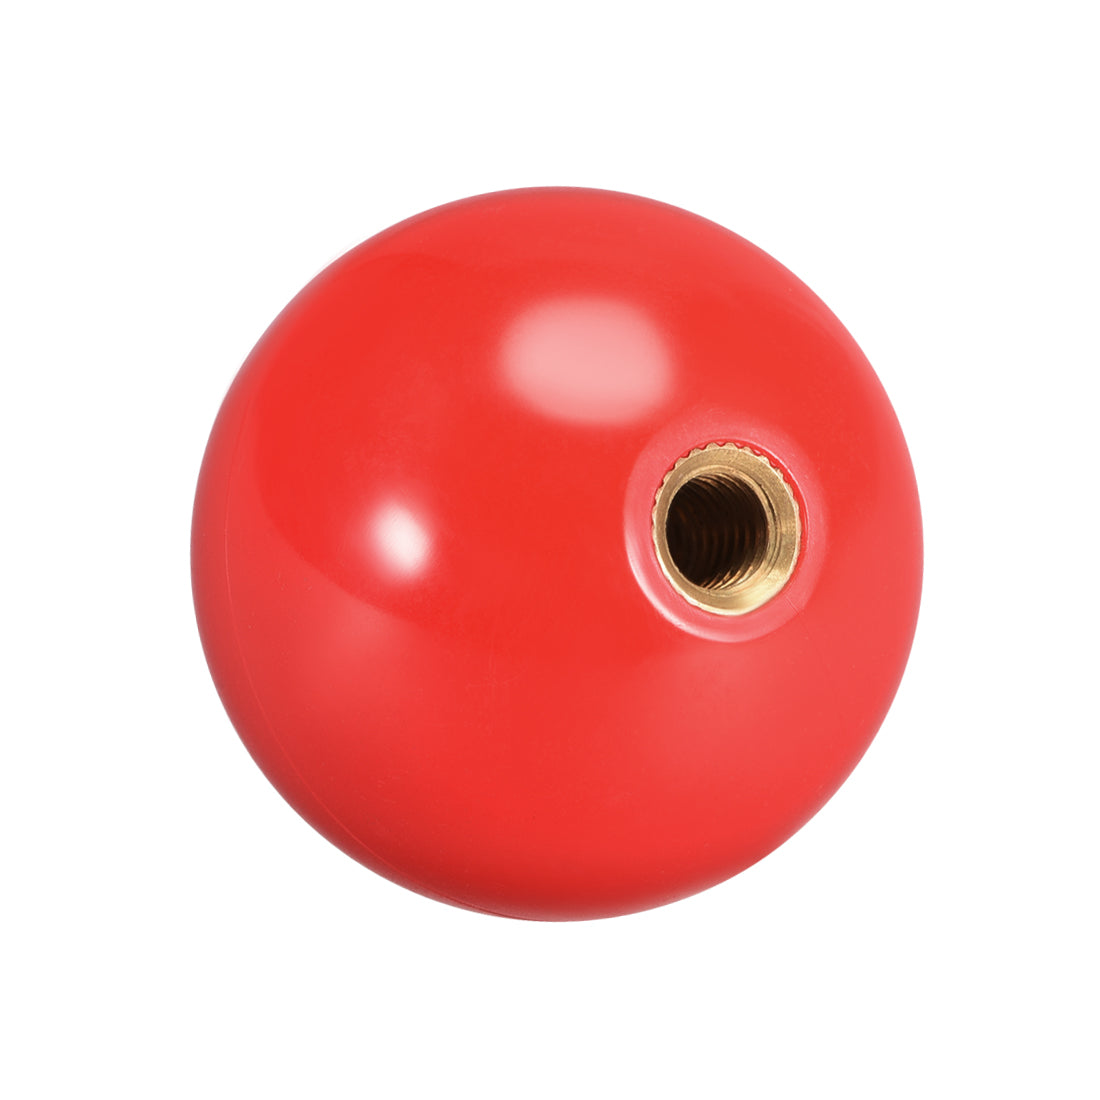 uxcell Uxcell Joystick Ball Top Handle Rocker Round Head Arcade Fighting Game DIY Parts Replacement Red 2Pcs